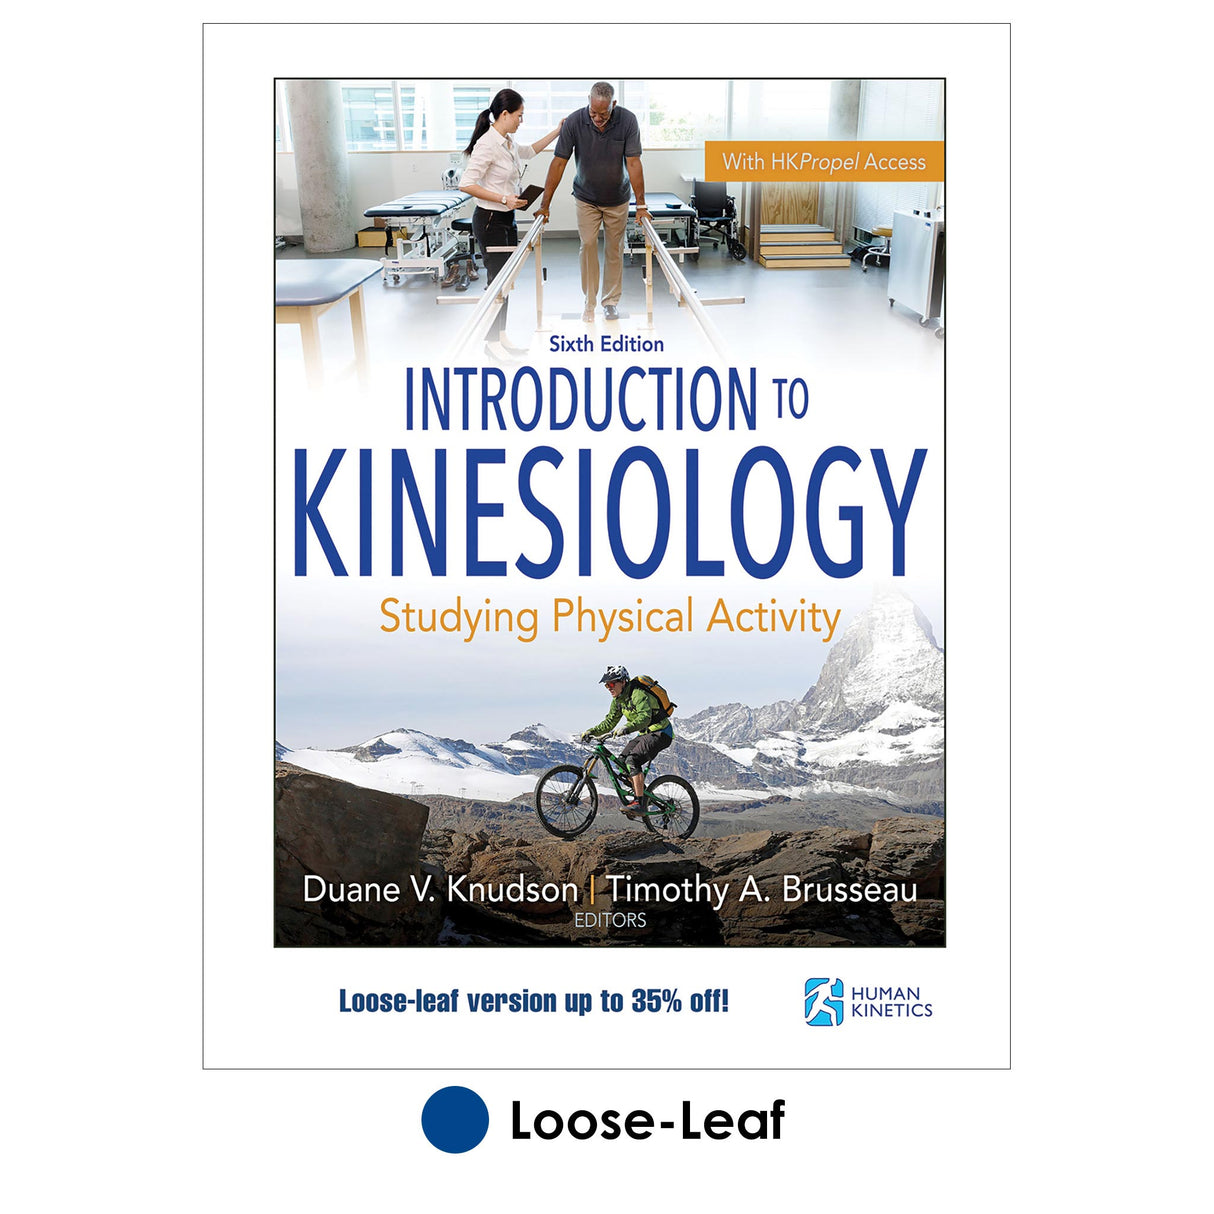 Introduction to Kinesiology 6th Edition With HKPropel Access-Loose-Leaf Edition